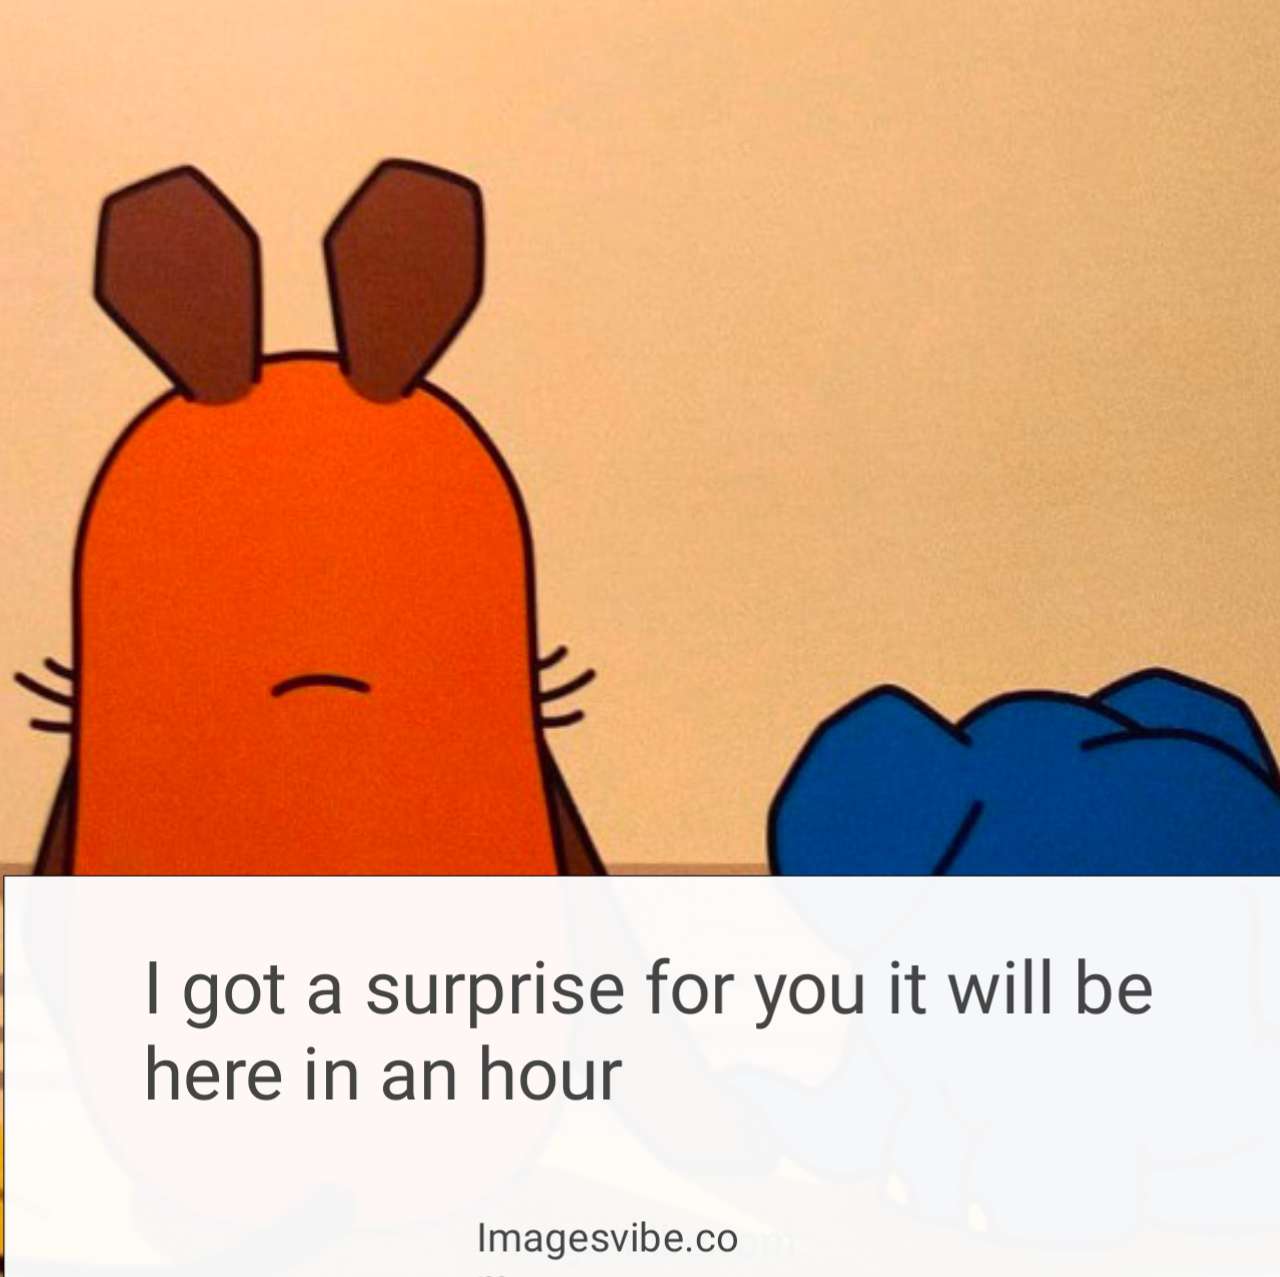 Best 30+Boy And Girl Love Cartoon Images With Quotes & Love Feelings -  Images Vibe